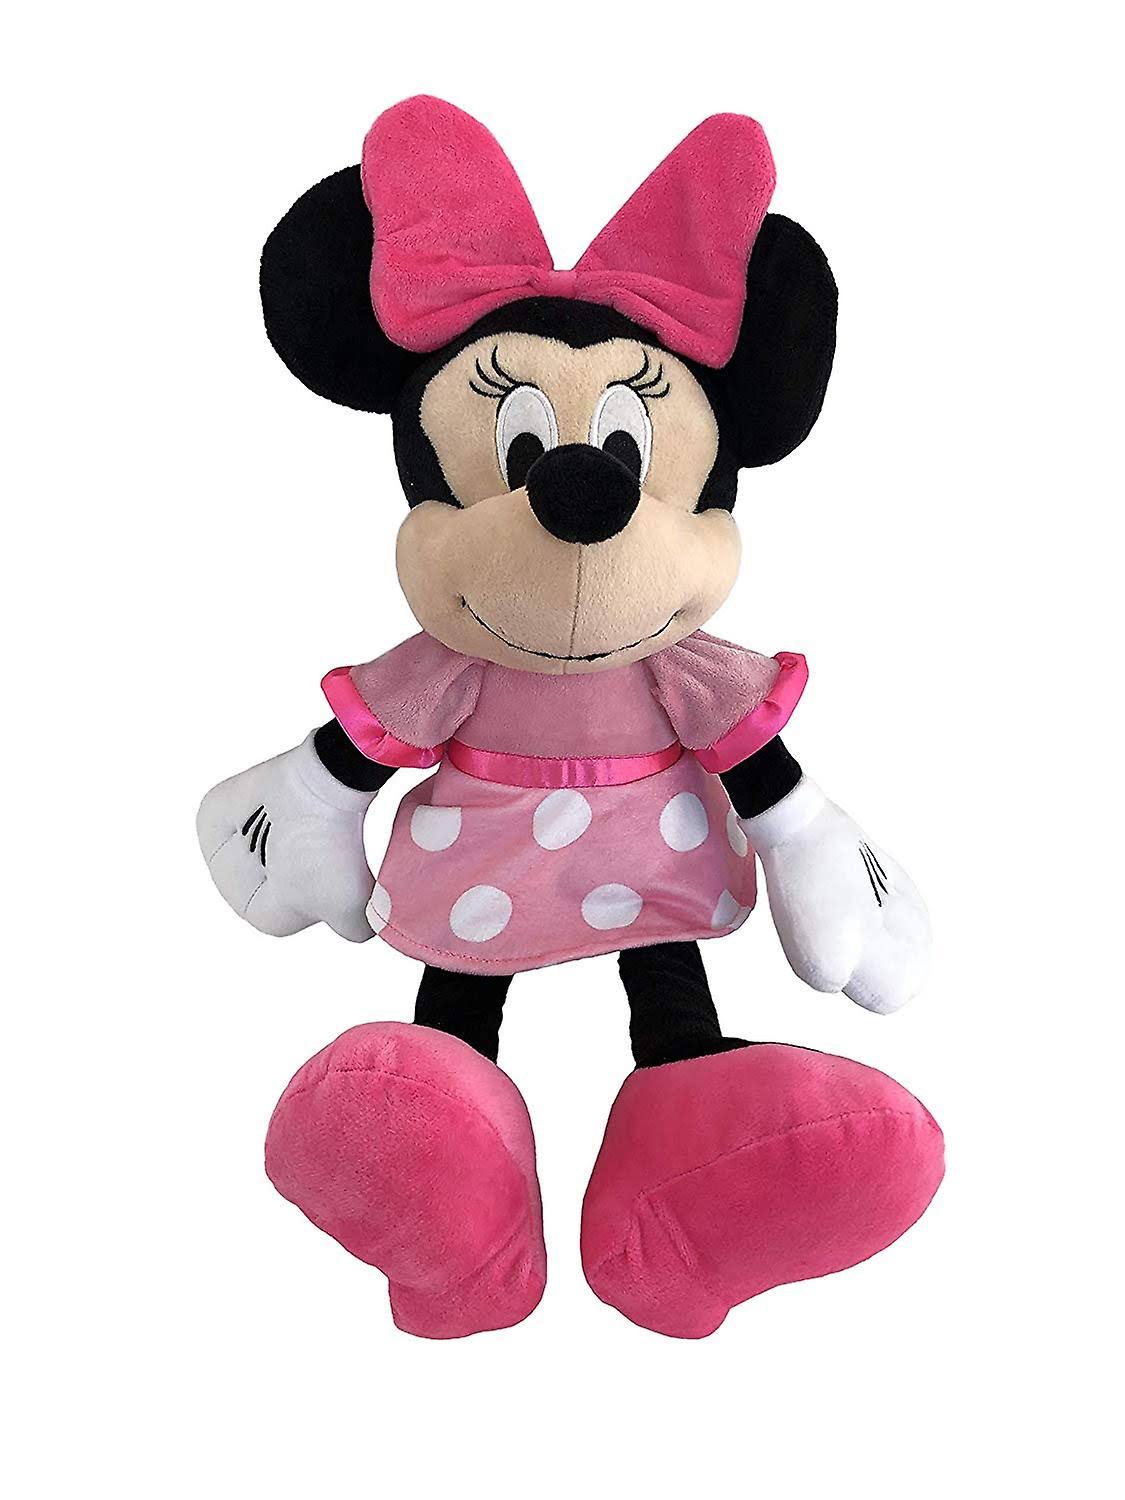 Plush - Disney - Baby Minnie Mouse Pink 19" New 73035 multi-colored 25"